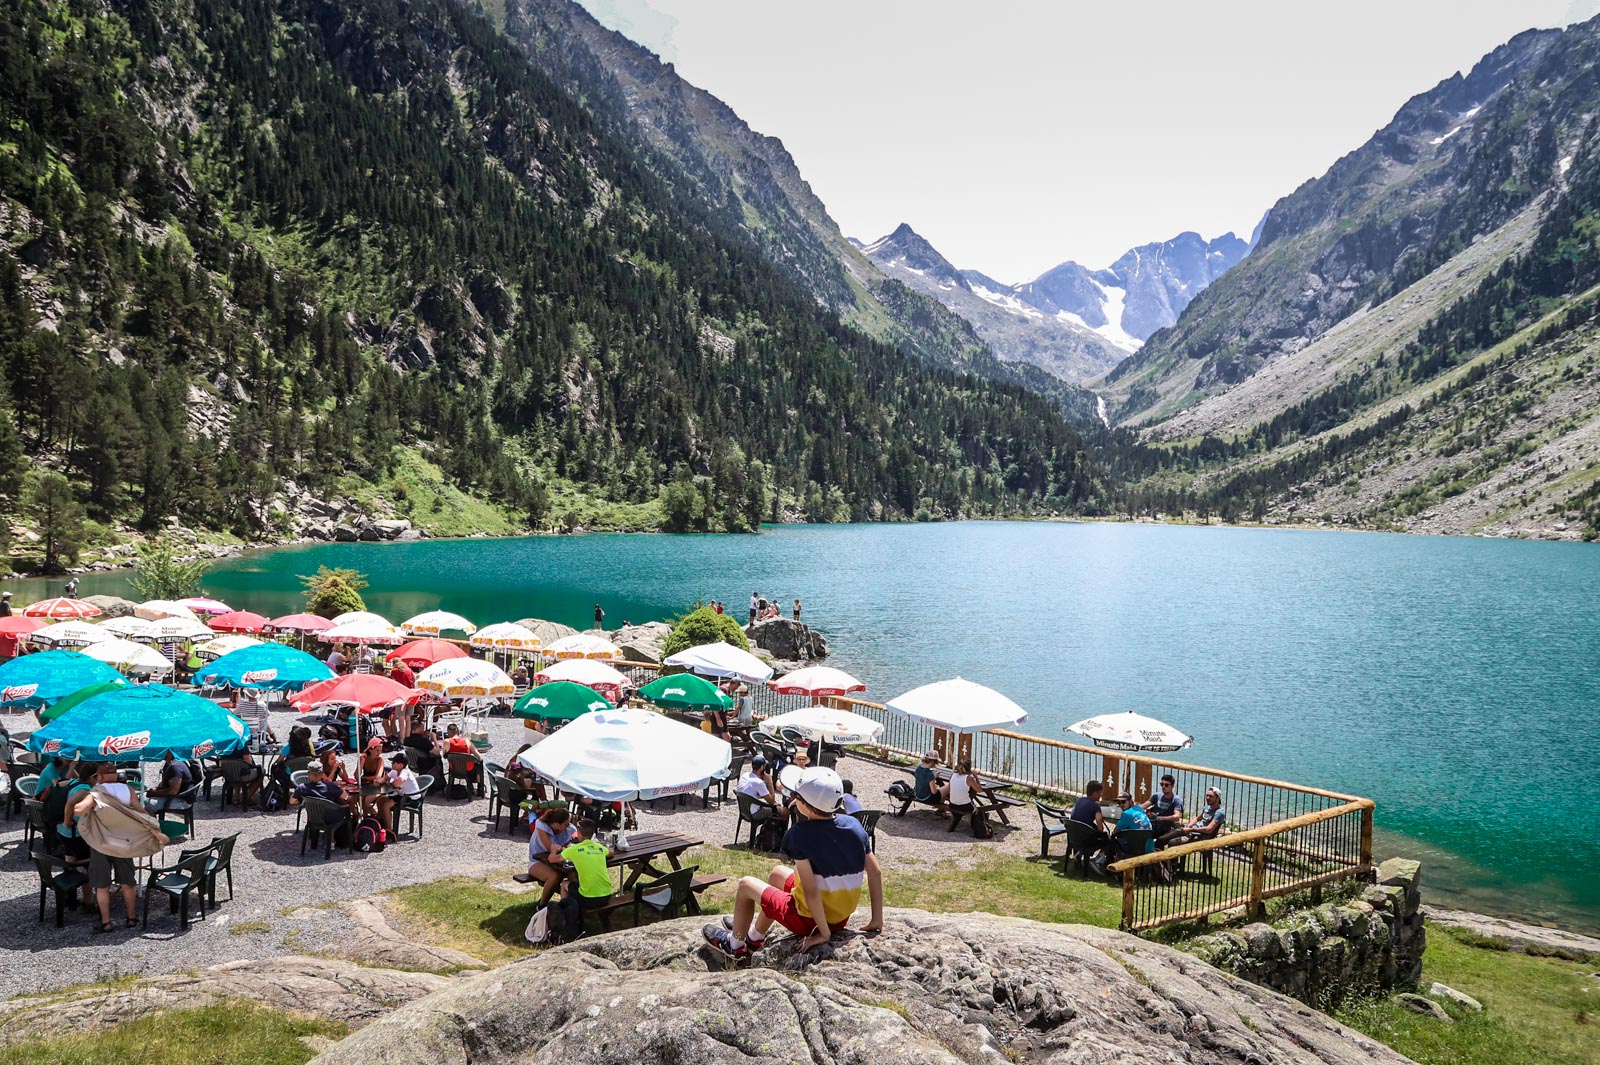 Discovery of Lac de Gaube and the Pont d'Espagne, must-see sites in the Pyrenees - Guide Toulouse Pyrénées